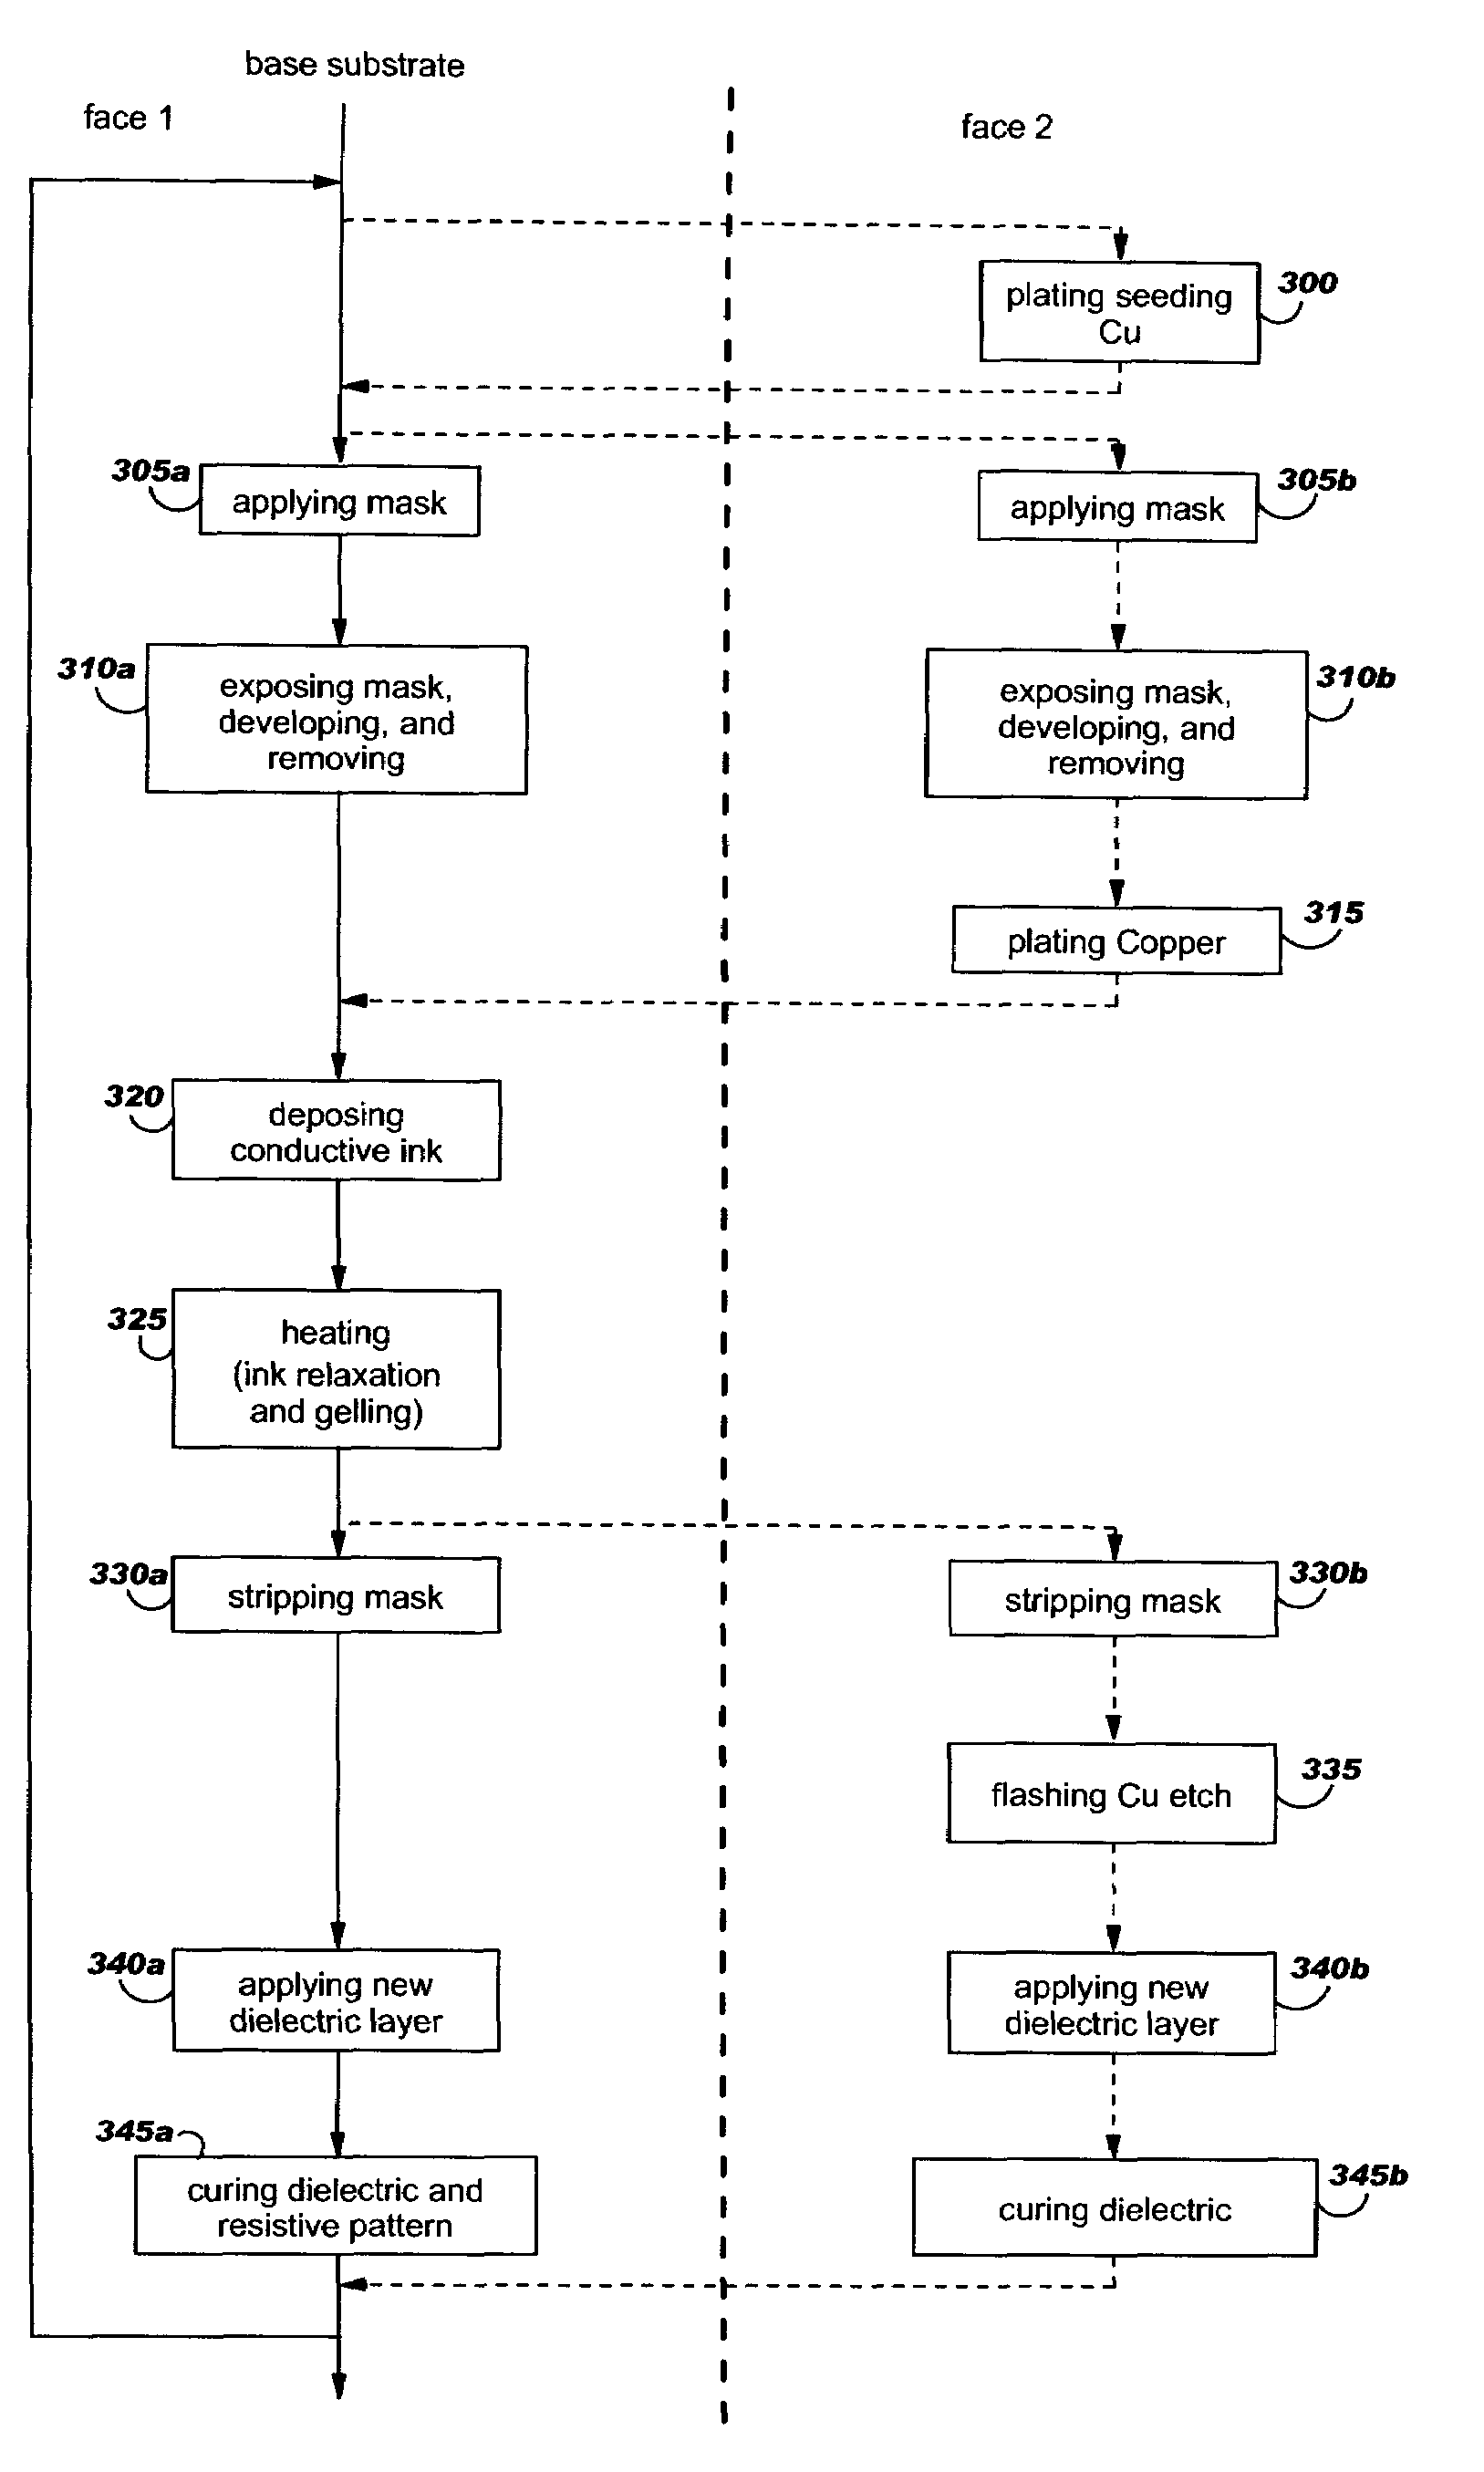 Method of embedding tamper proof layers and discrete components into printed circuit board stack-up